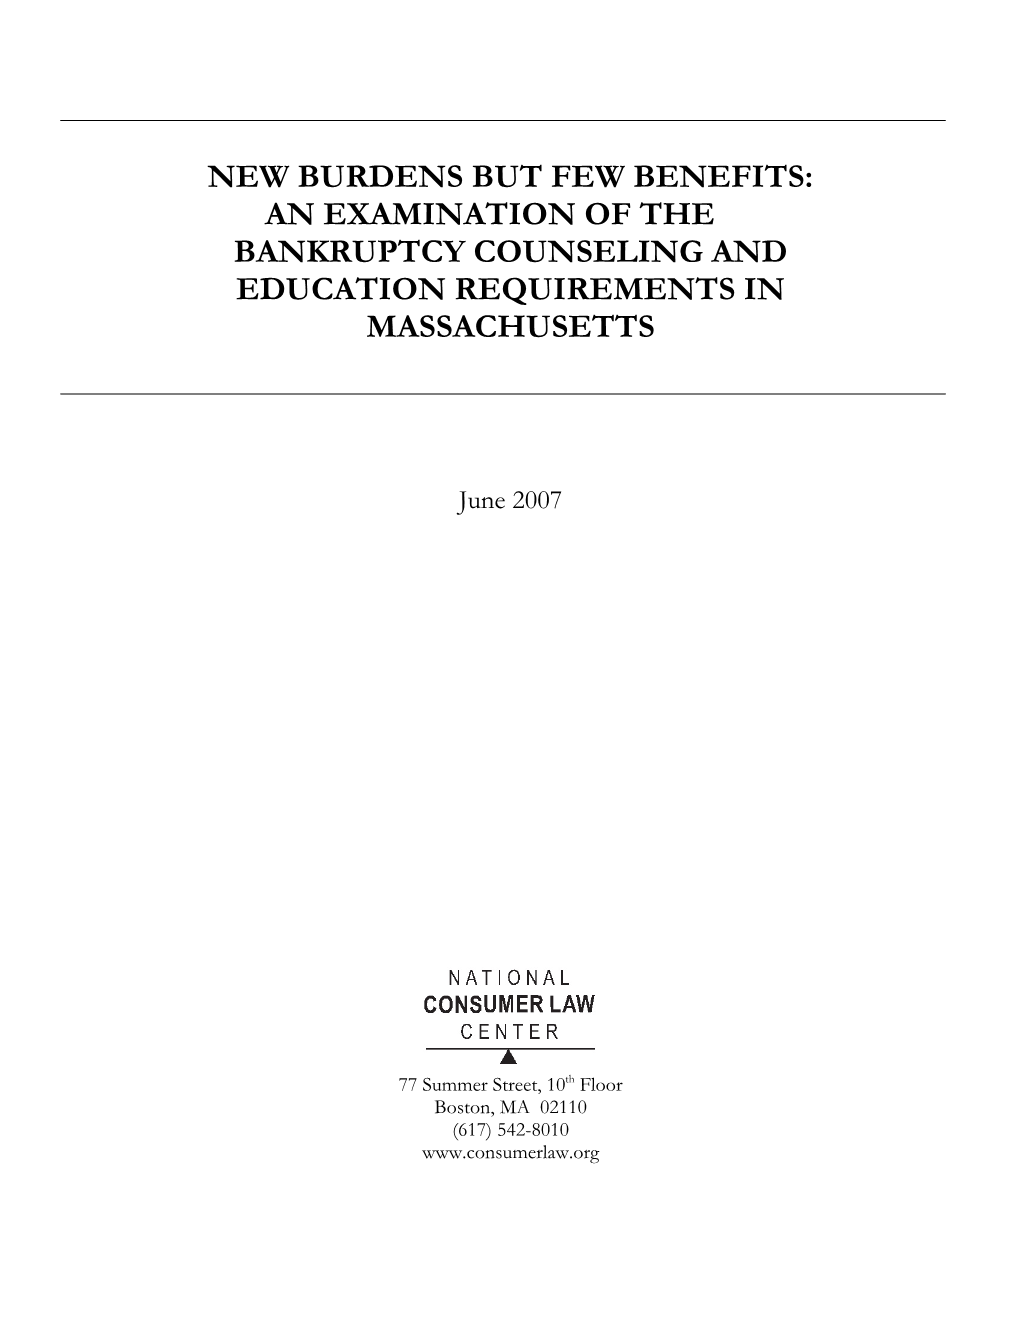 An Examination of the Bankruptcy Counseling and Education Requirements in Massachusetts